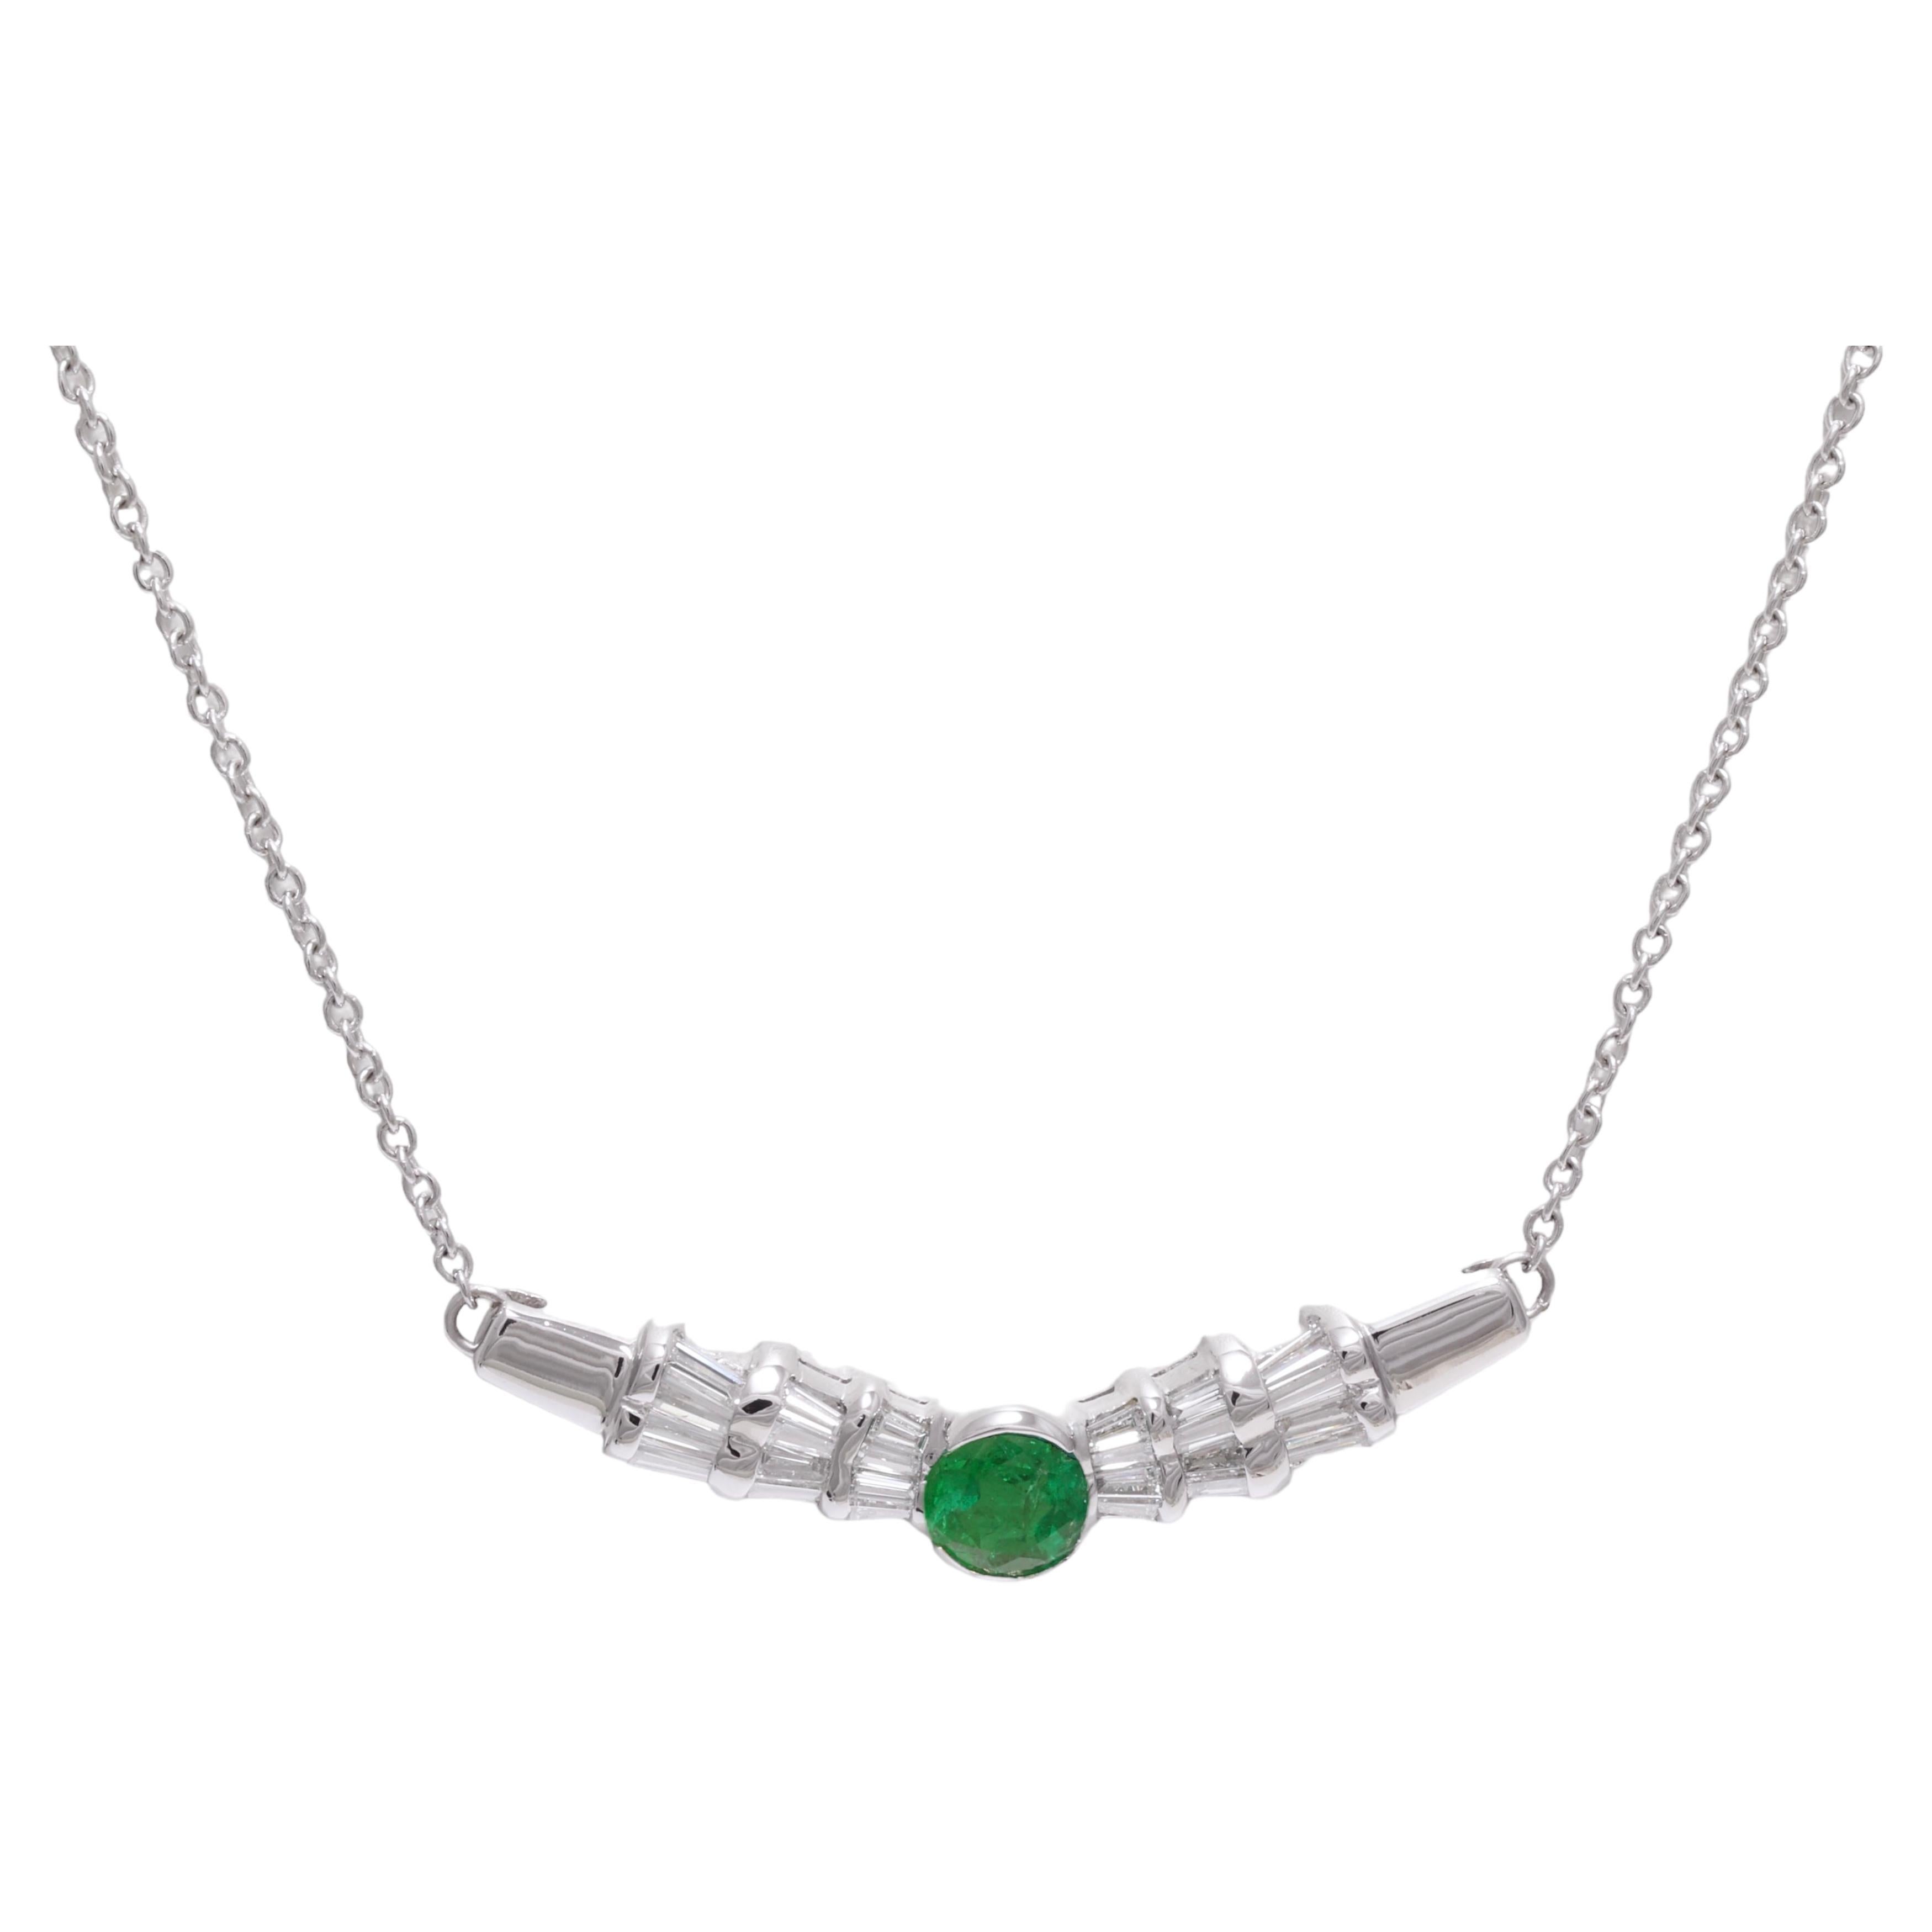 18 kt. White Gold Necklace with 1 ct. Emerald and 1.68 Ct. Diamonds